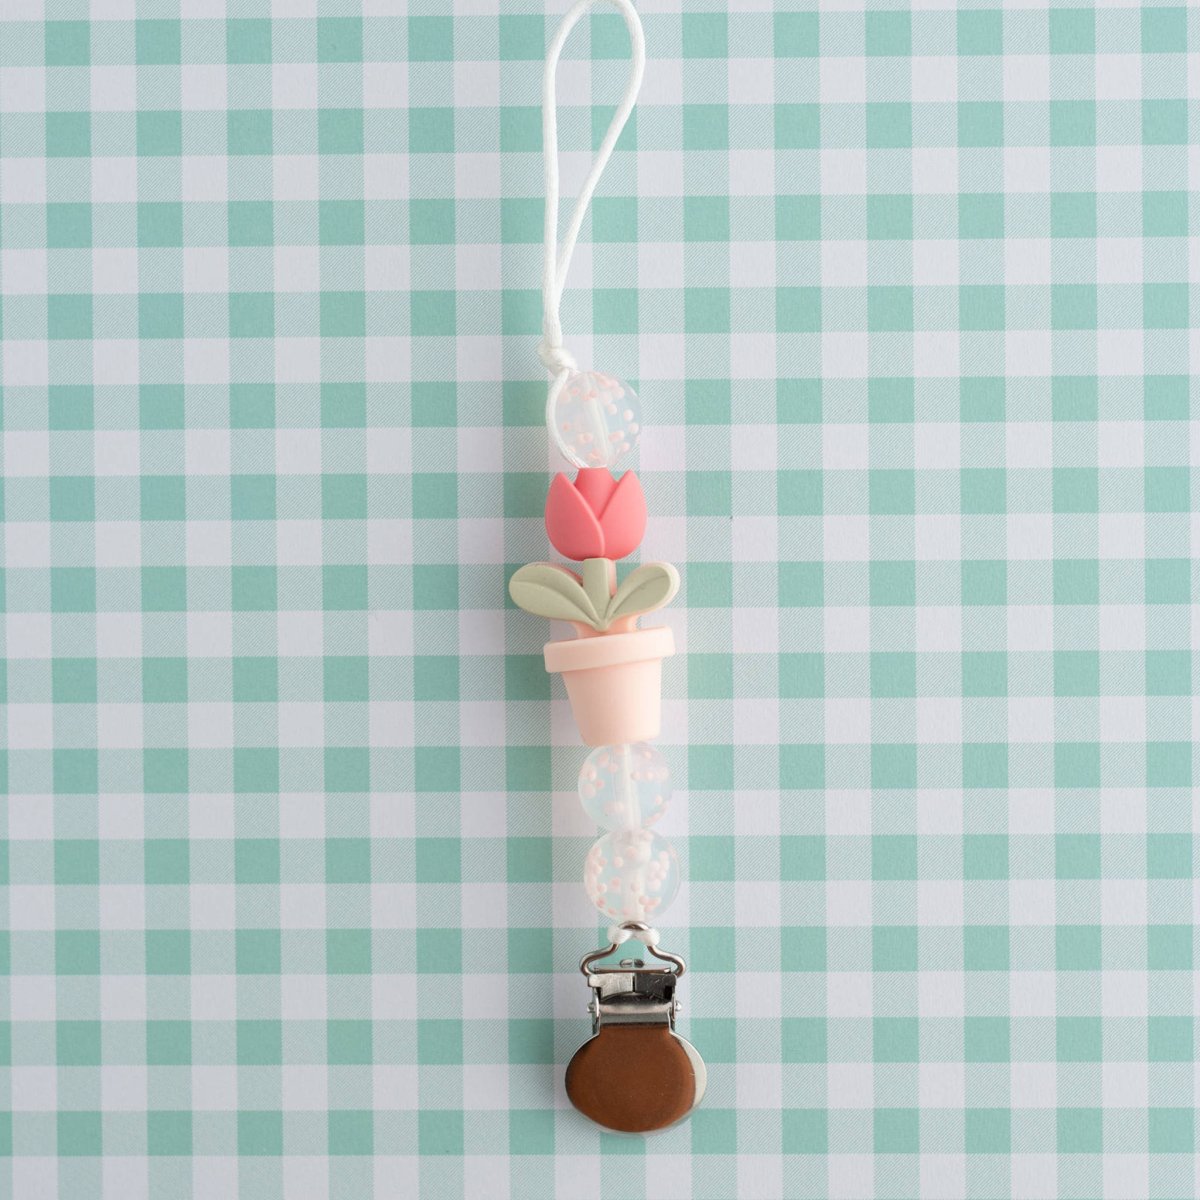 Shop the Image Plant Lady Baby Pacifier Clip from Cara & Co Craft Supply